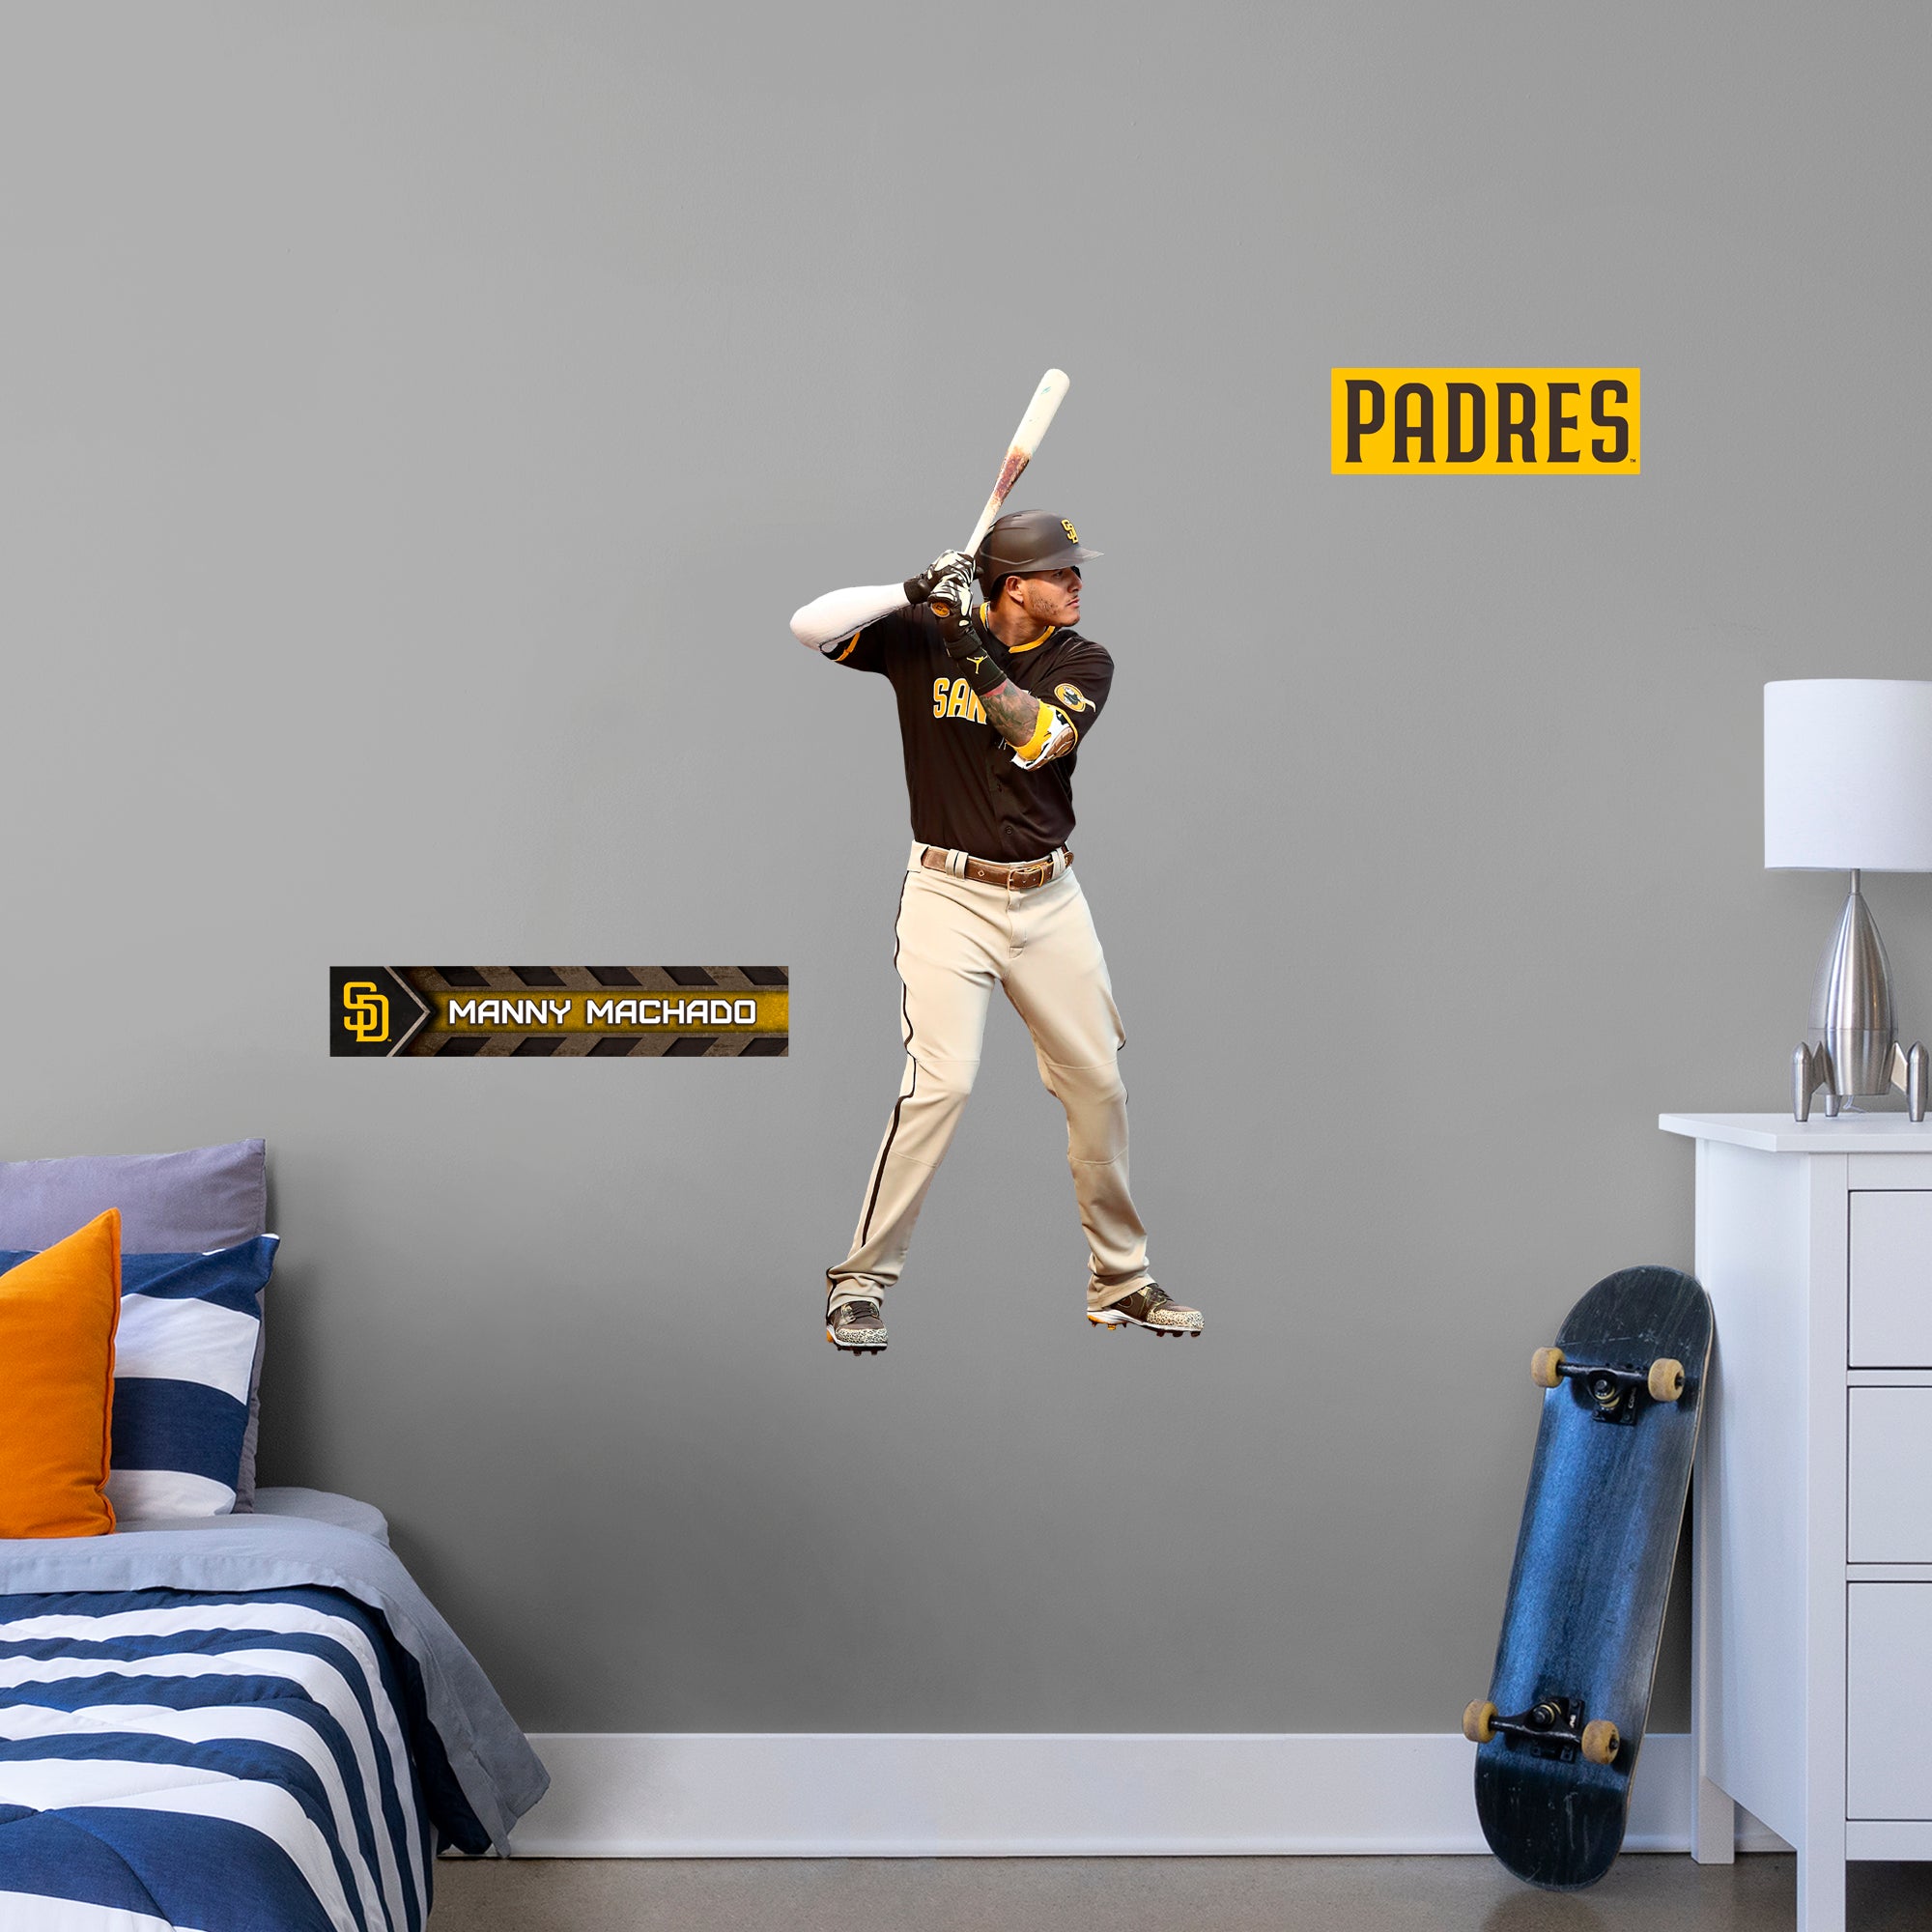 Manny Machado for San Diego Padres: RealBig Officially Licensed MLB Removable Wall Decal Giant Athlete + 2 Decals by Fathead | V